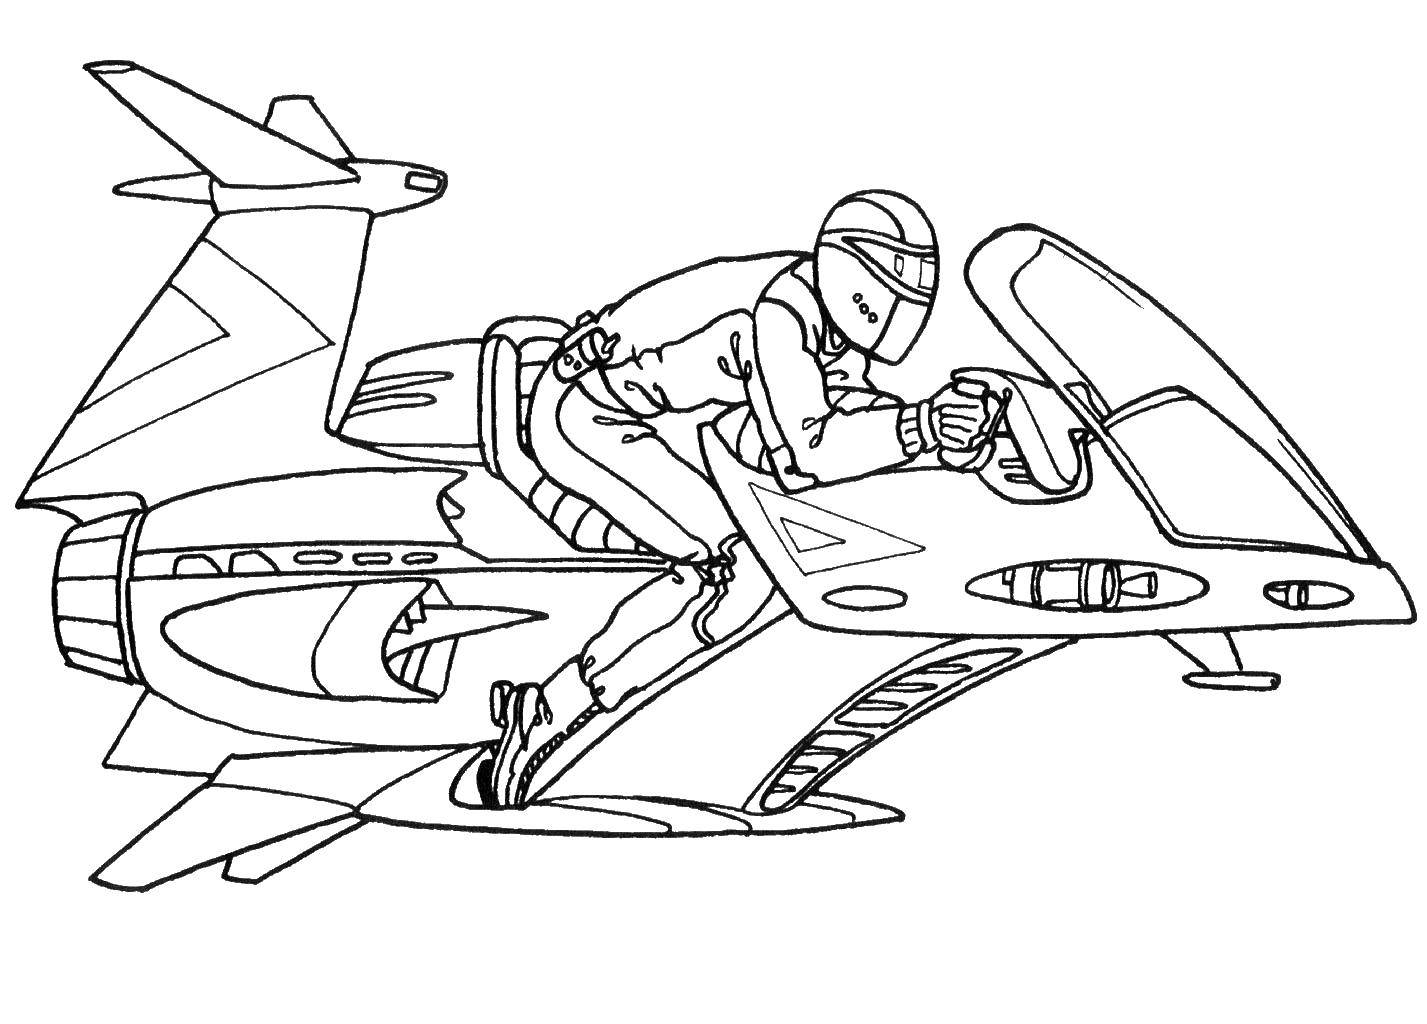 Coloring Flying vehicles. Category Equipment. Tags:  transport, rocket, people.